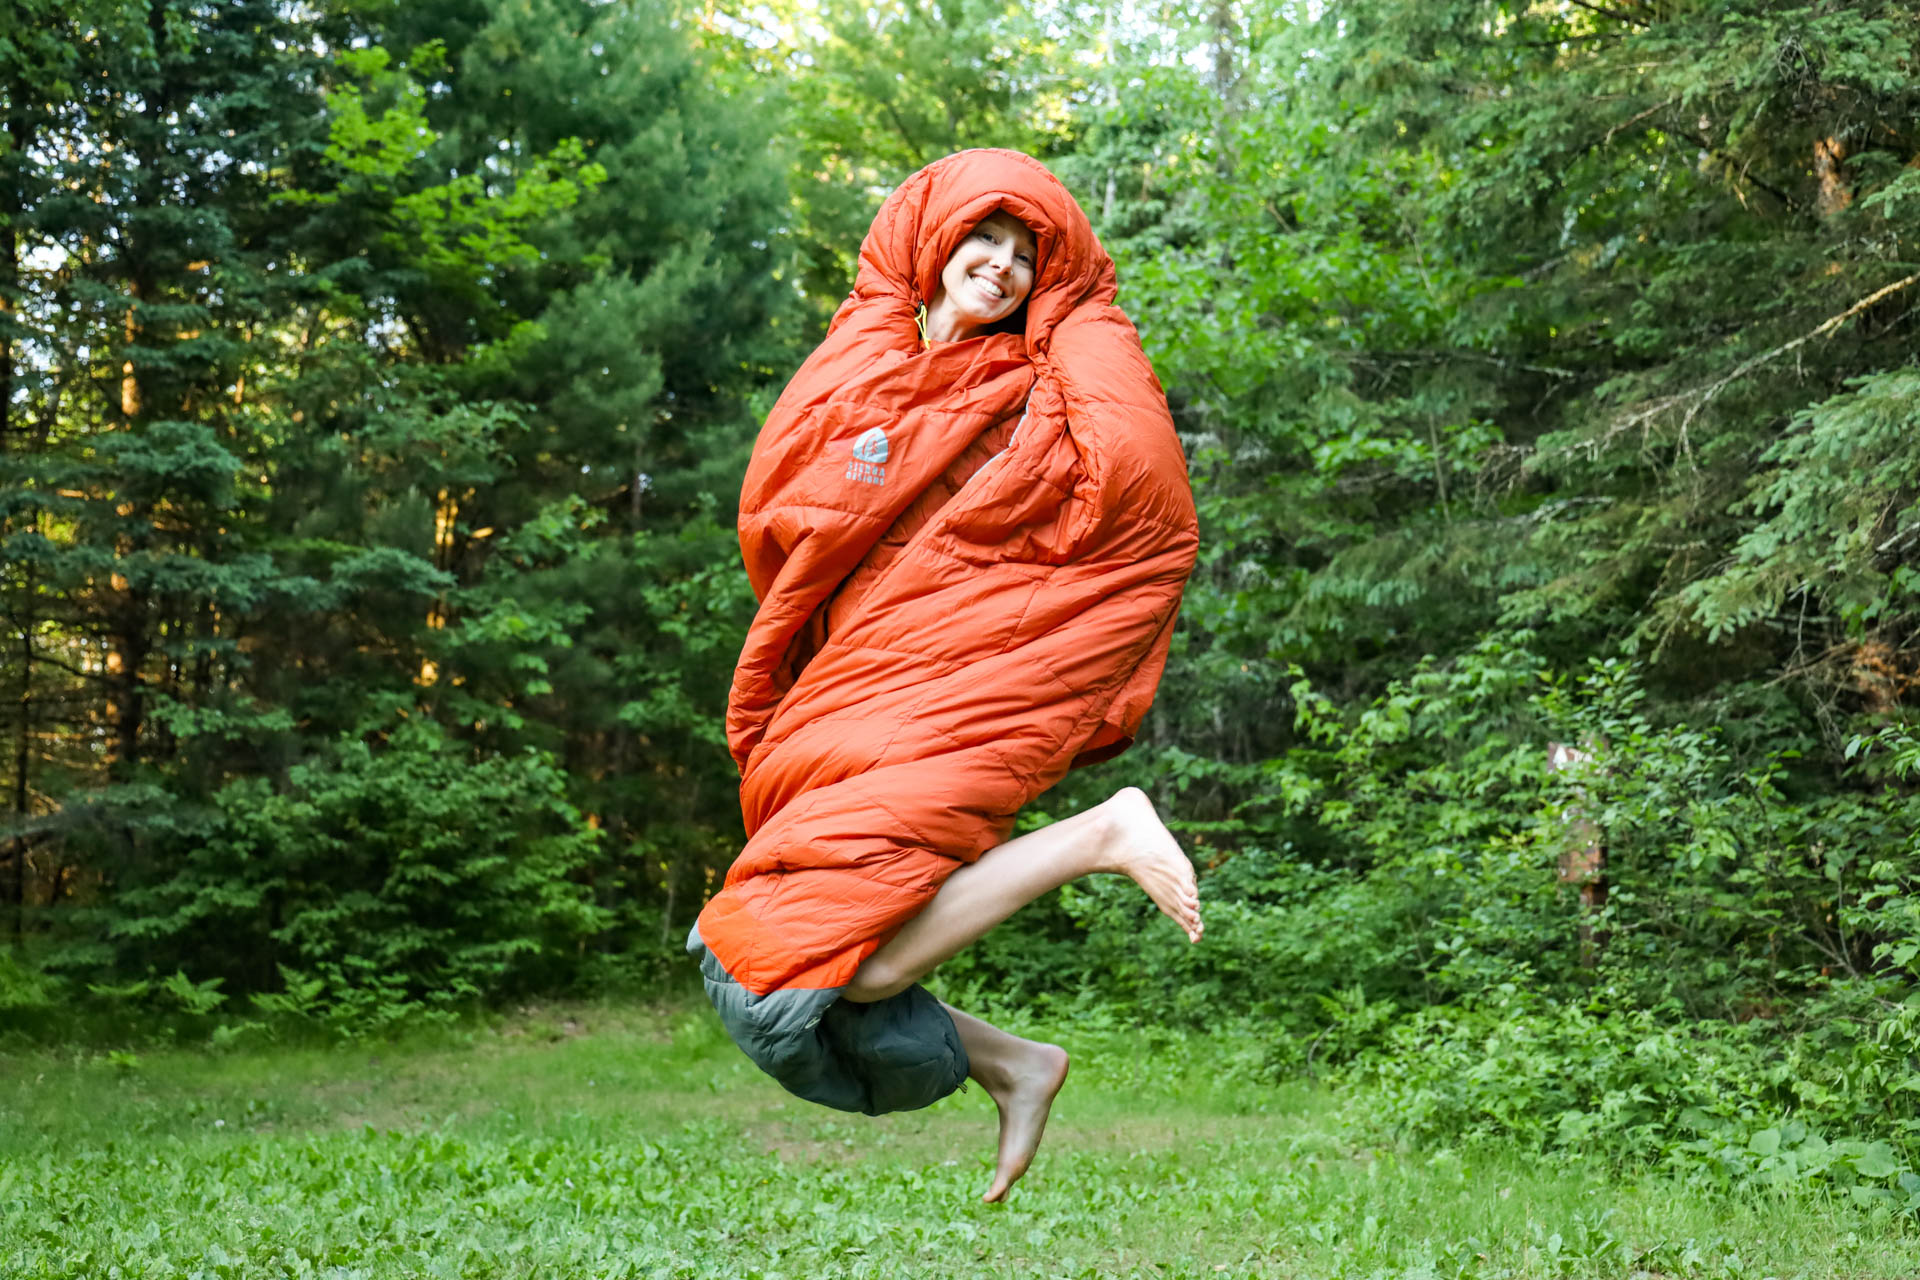 Night Cap 20 Recycled Synthetic Sleeping Bag